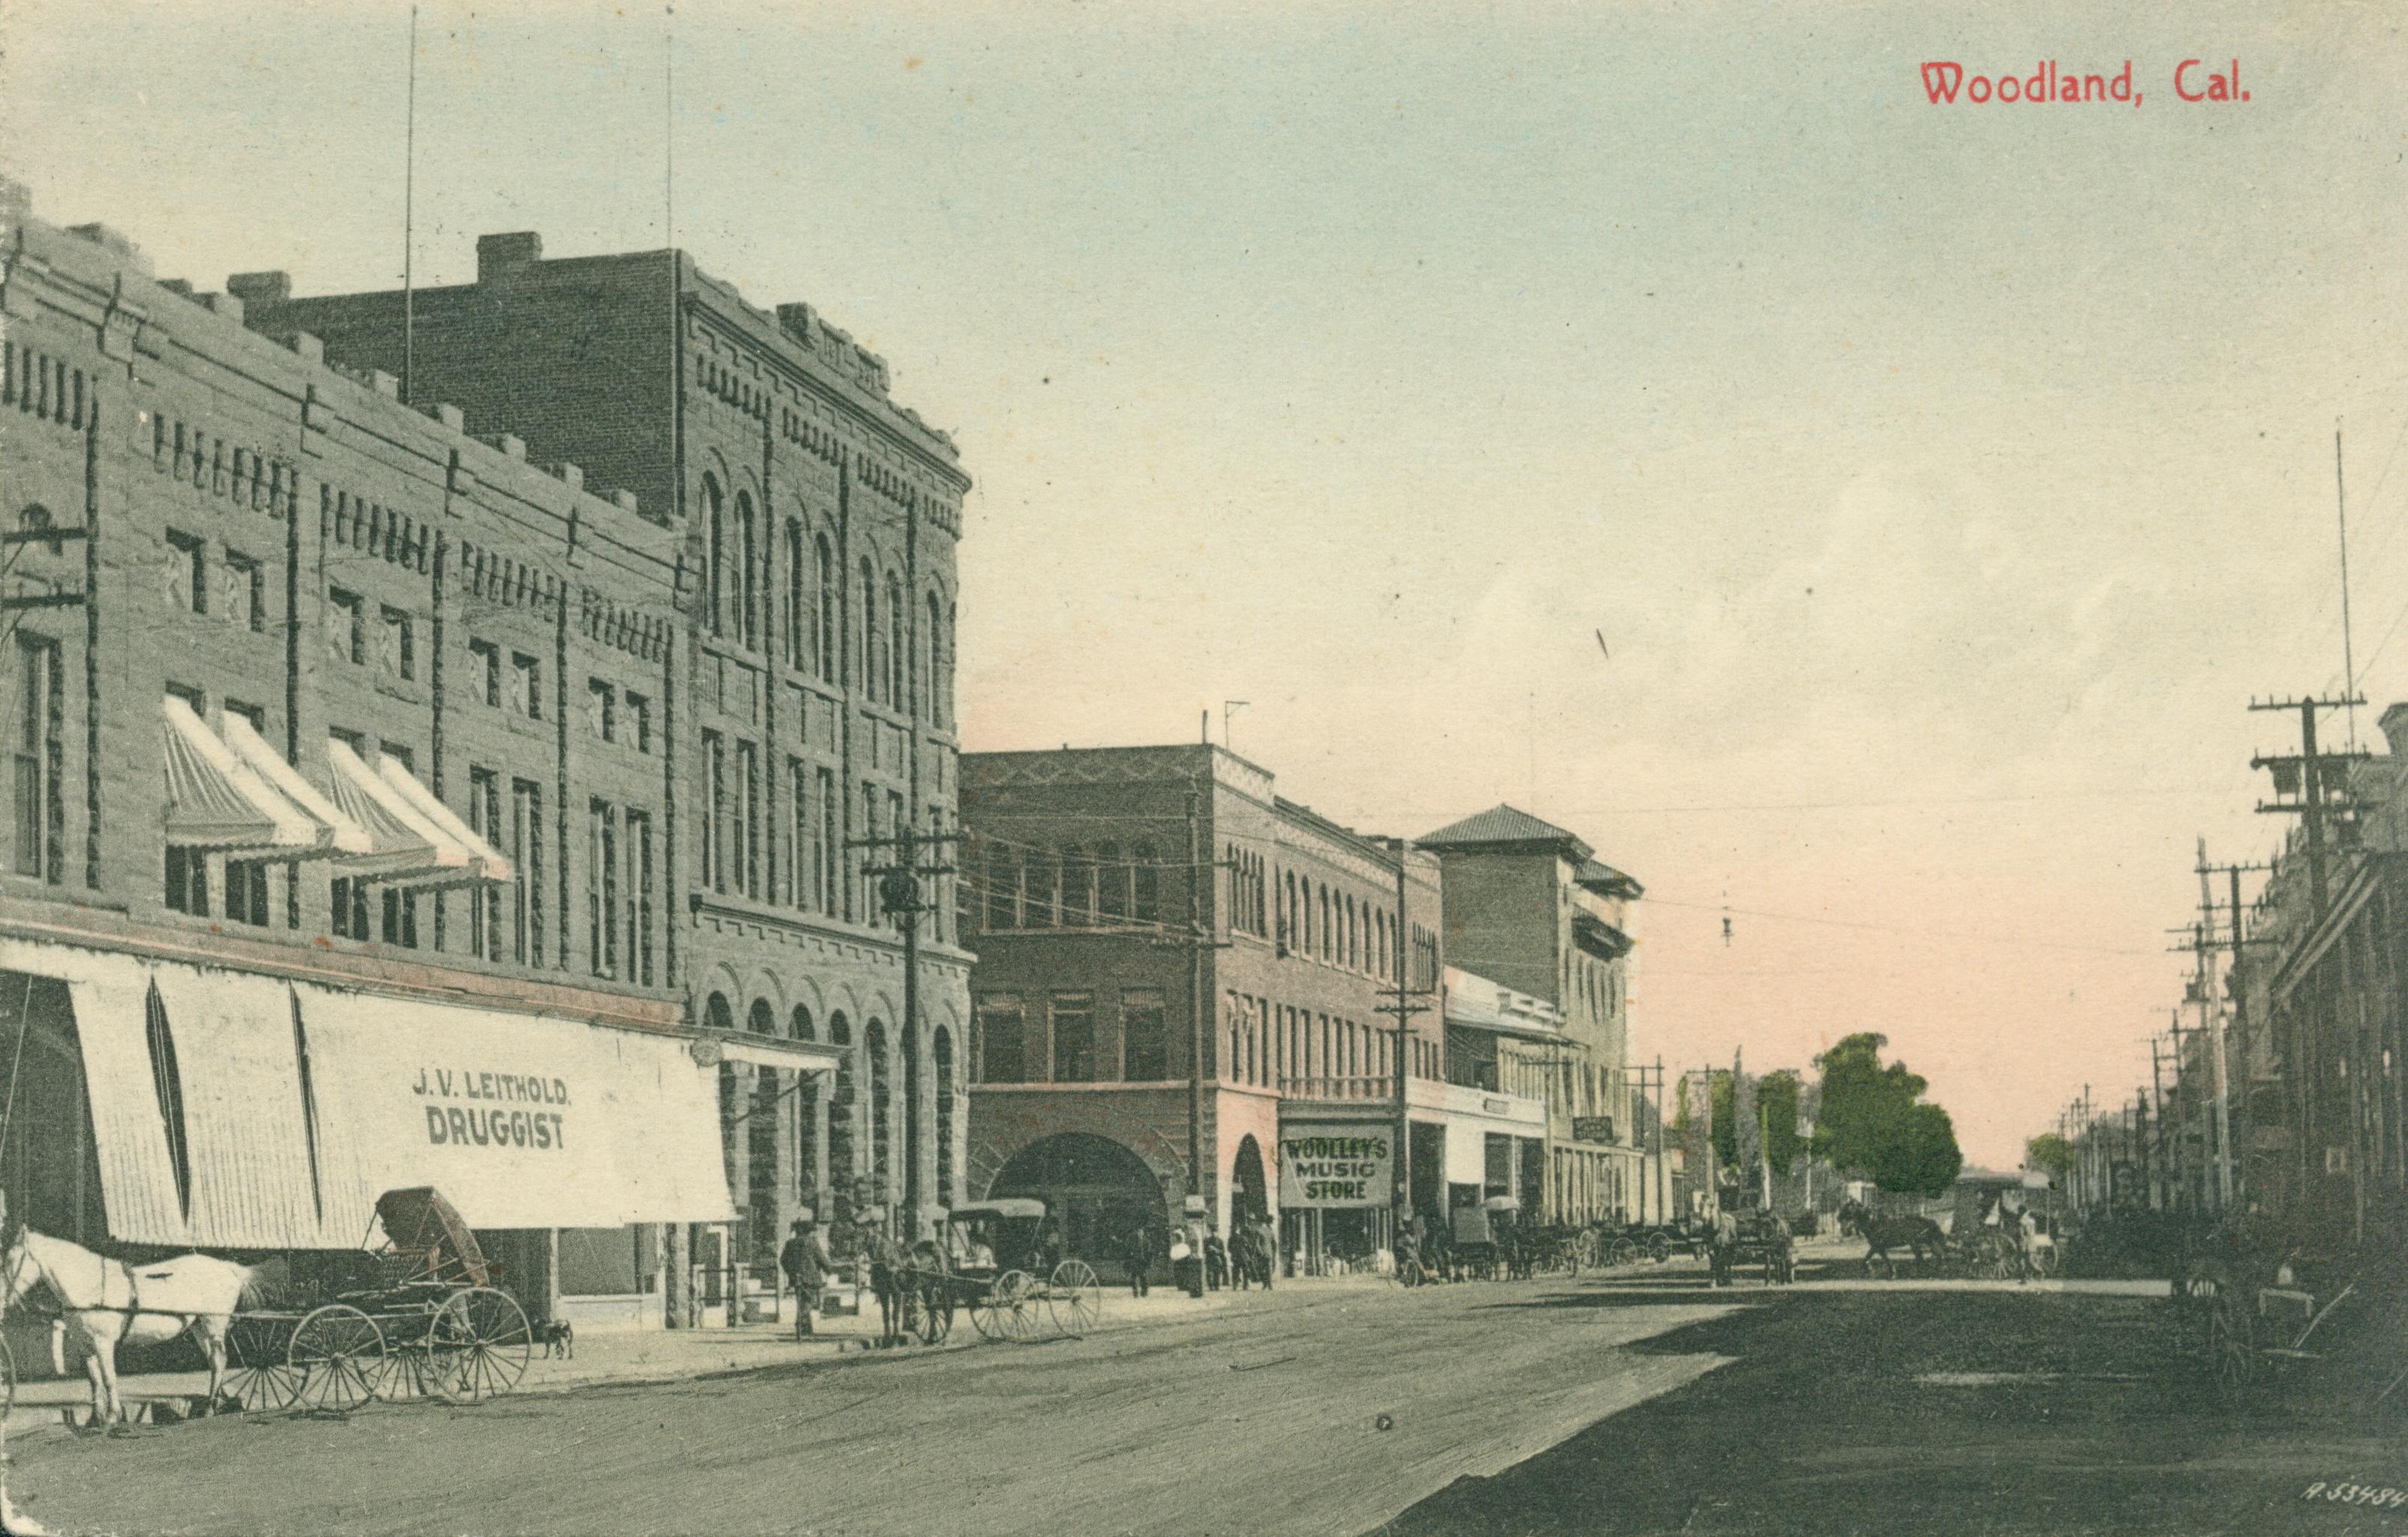 Shows a street in Woodland with the J. V. Leithold drugstore on the left